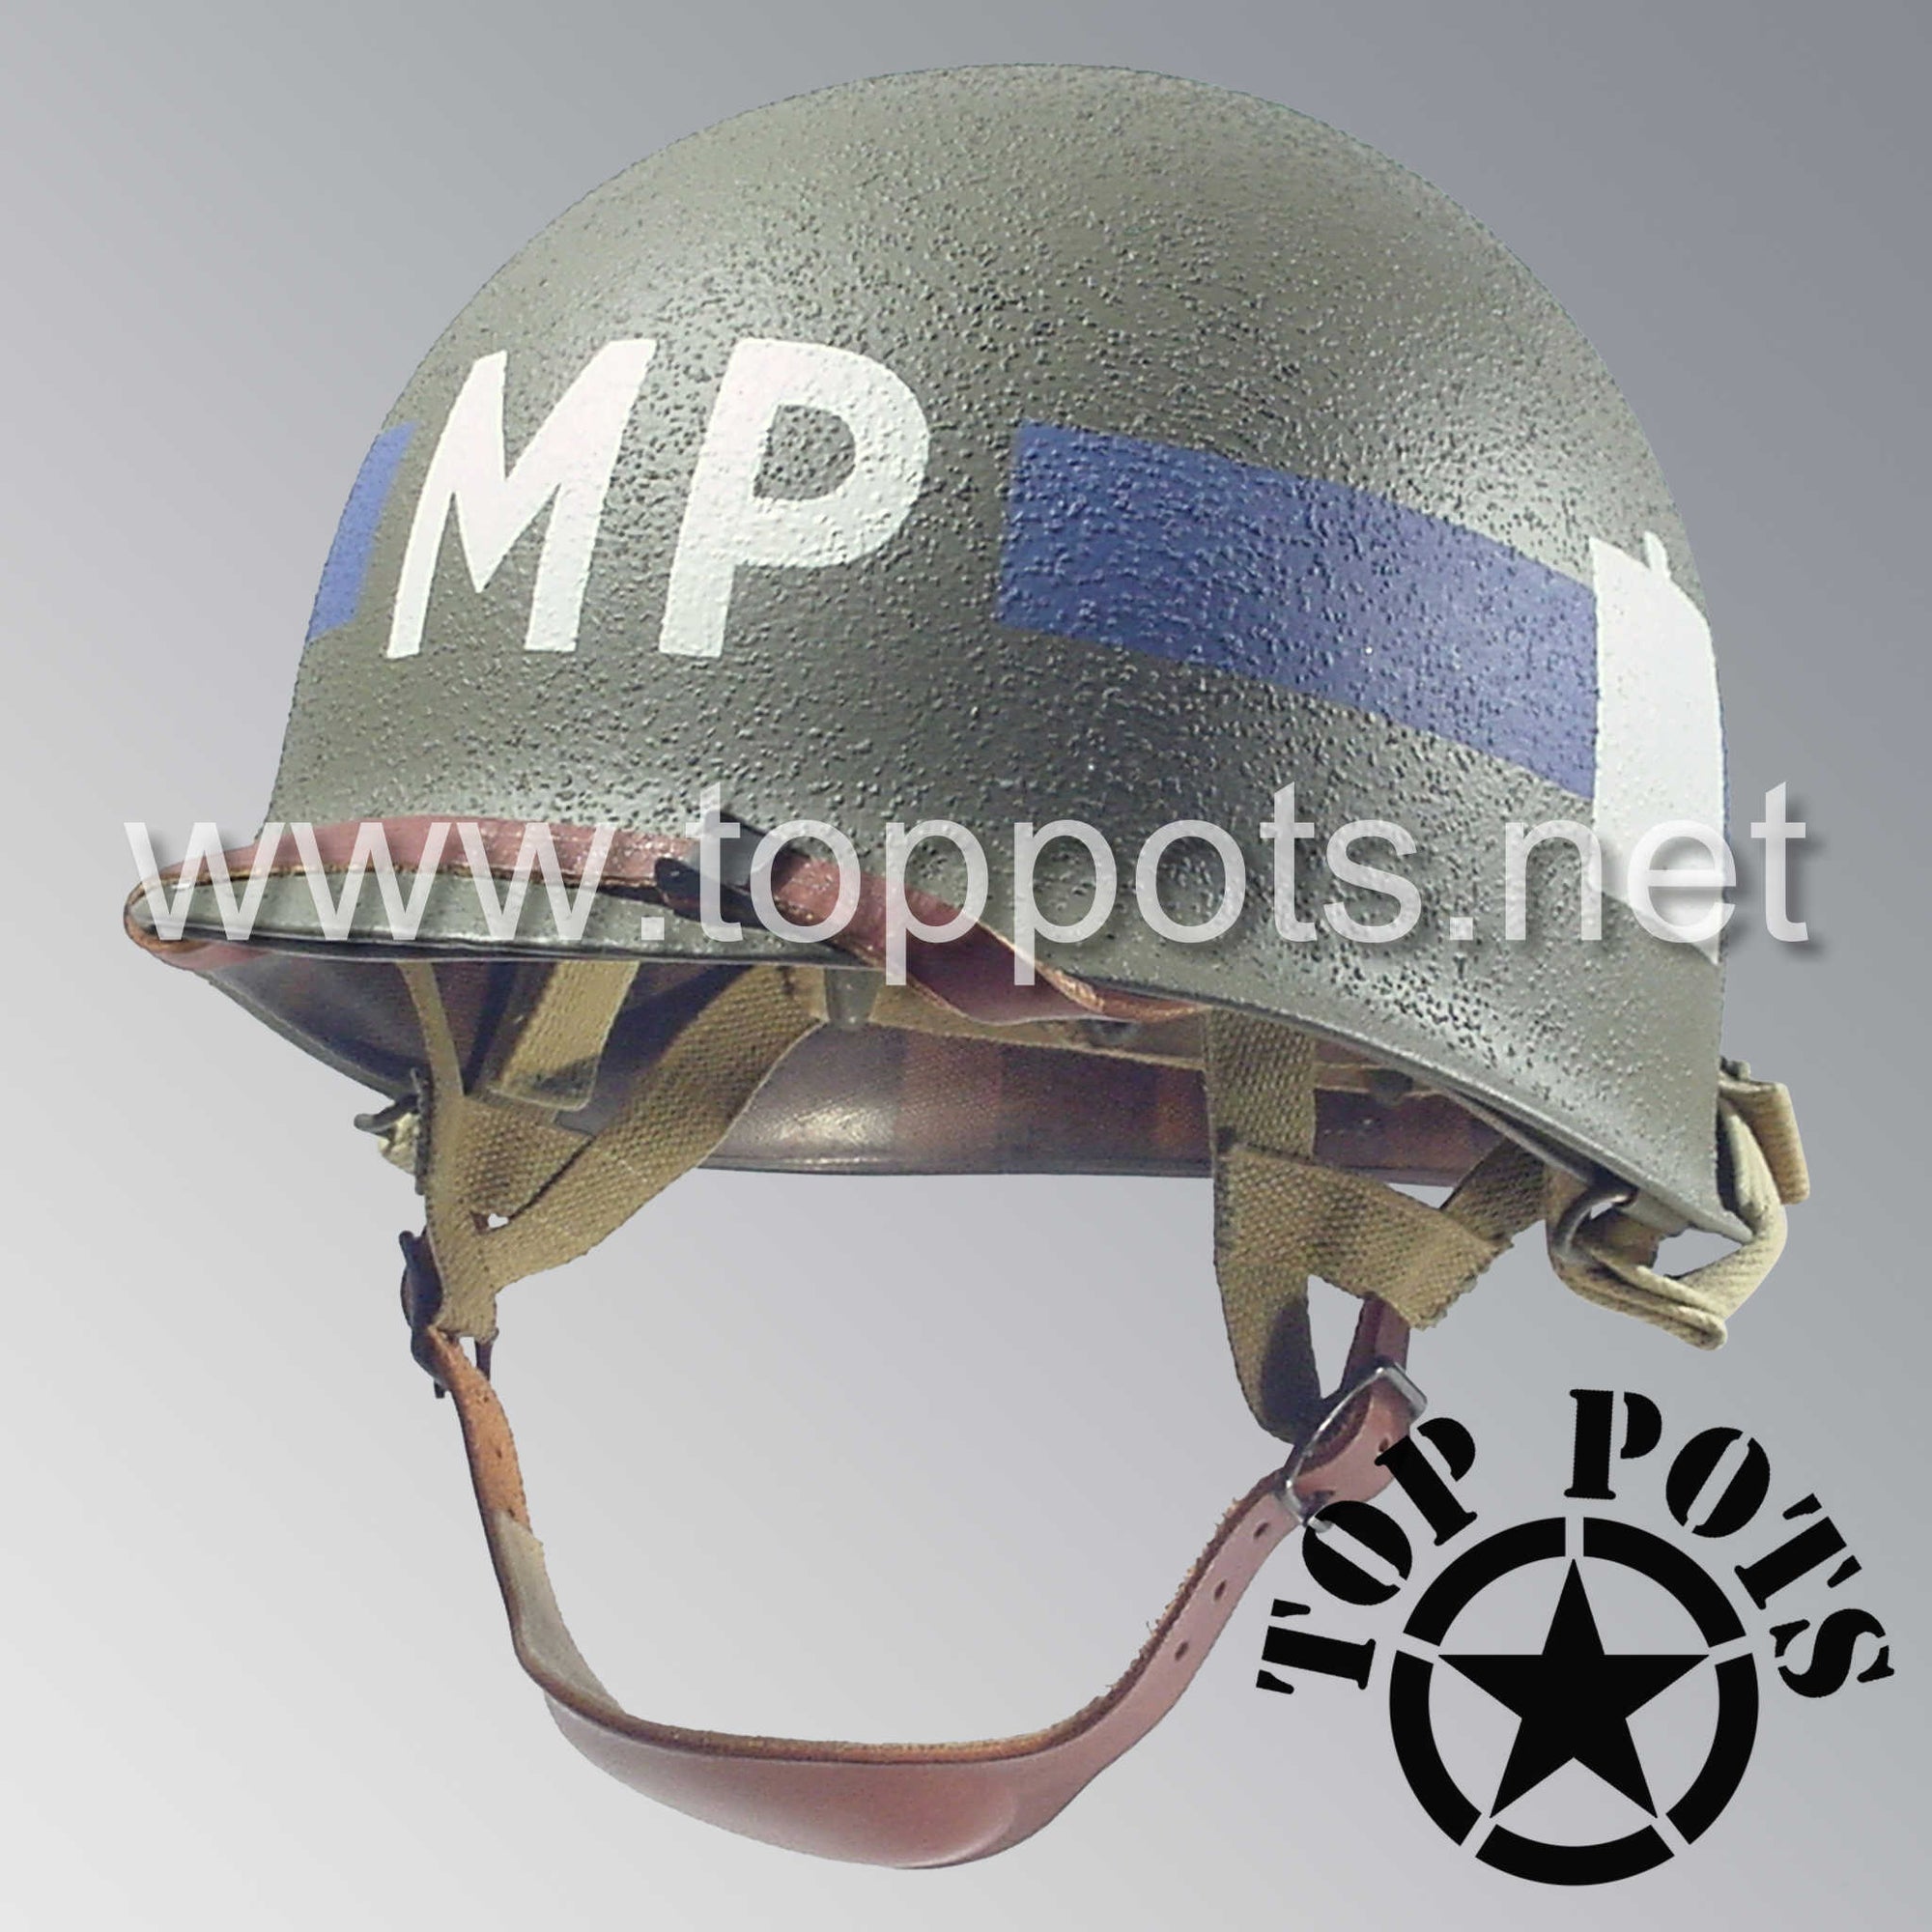 WWII US Army Restored Original M1C Paratrooper Airborne Helmet Swivel Bale Shell and Liner with 101st Airborne Divisional Police Platoon Emblem